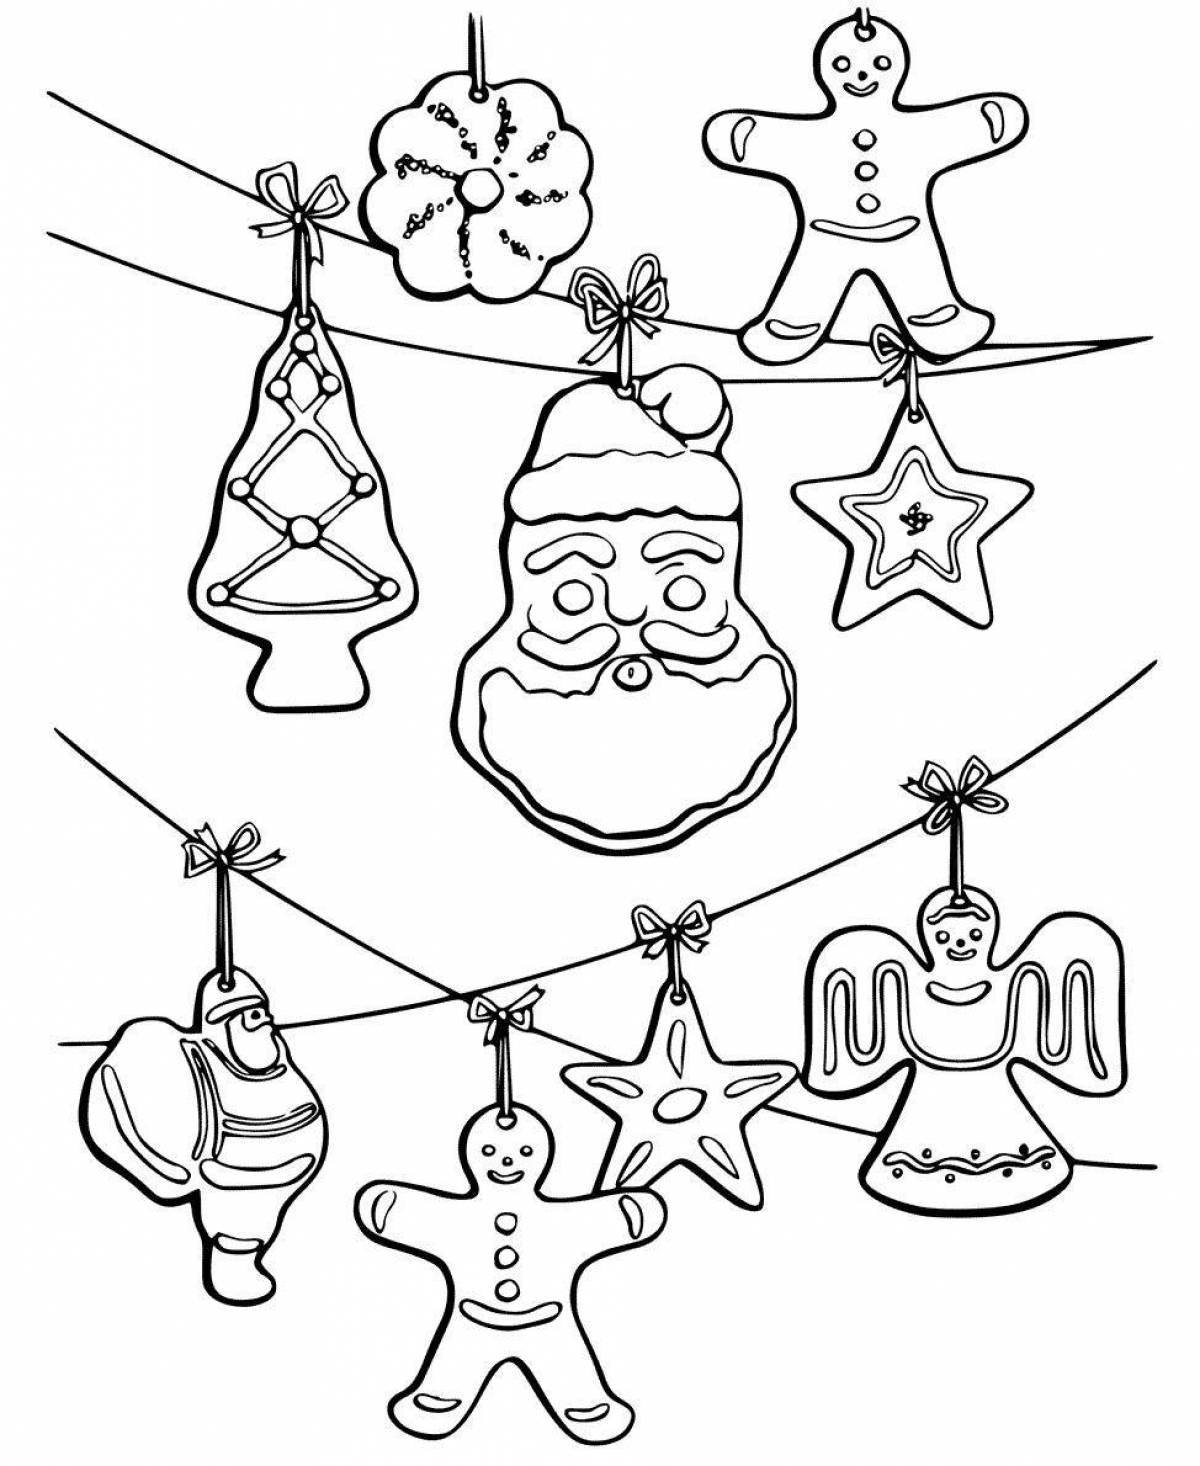 Colorful Christmas garland coloring book